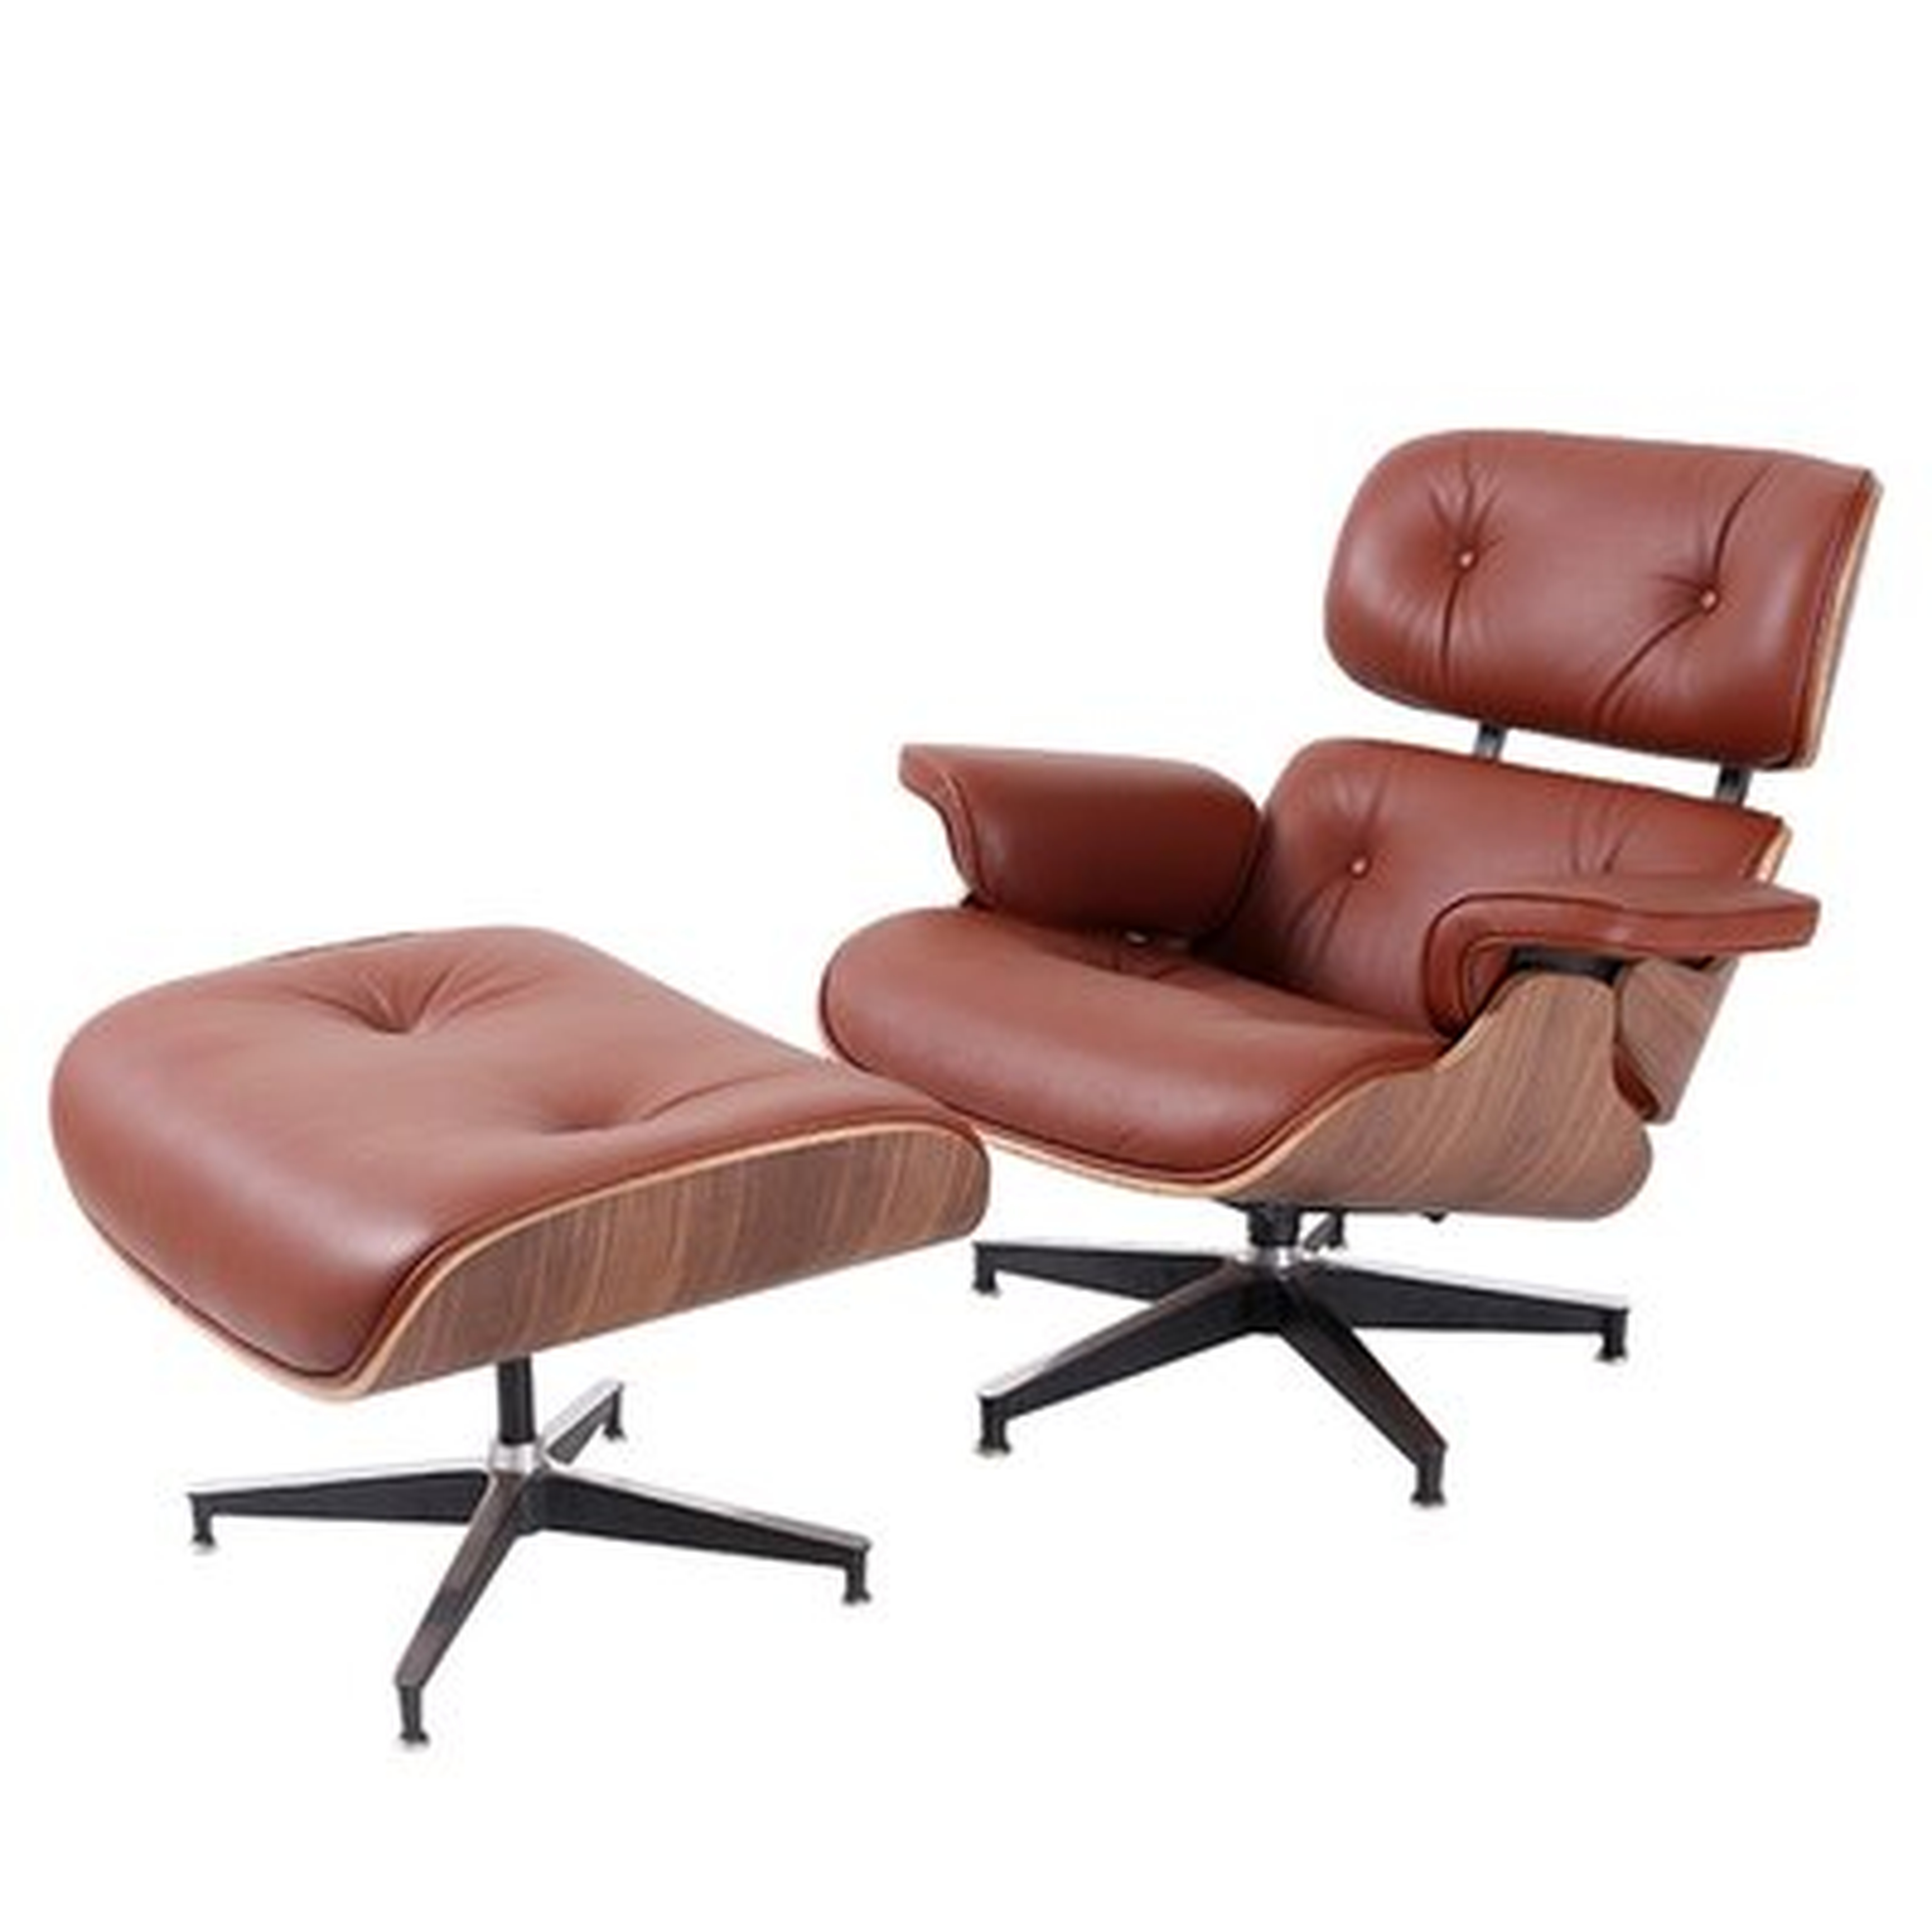 Classic Eames Recliner Lazy Lunch Lounge Recliner Living Room Recliner - Wayfair